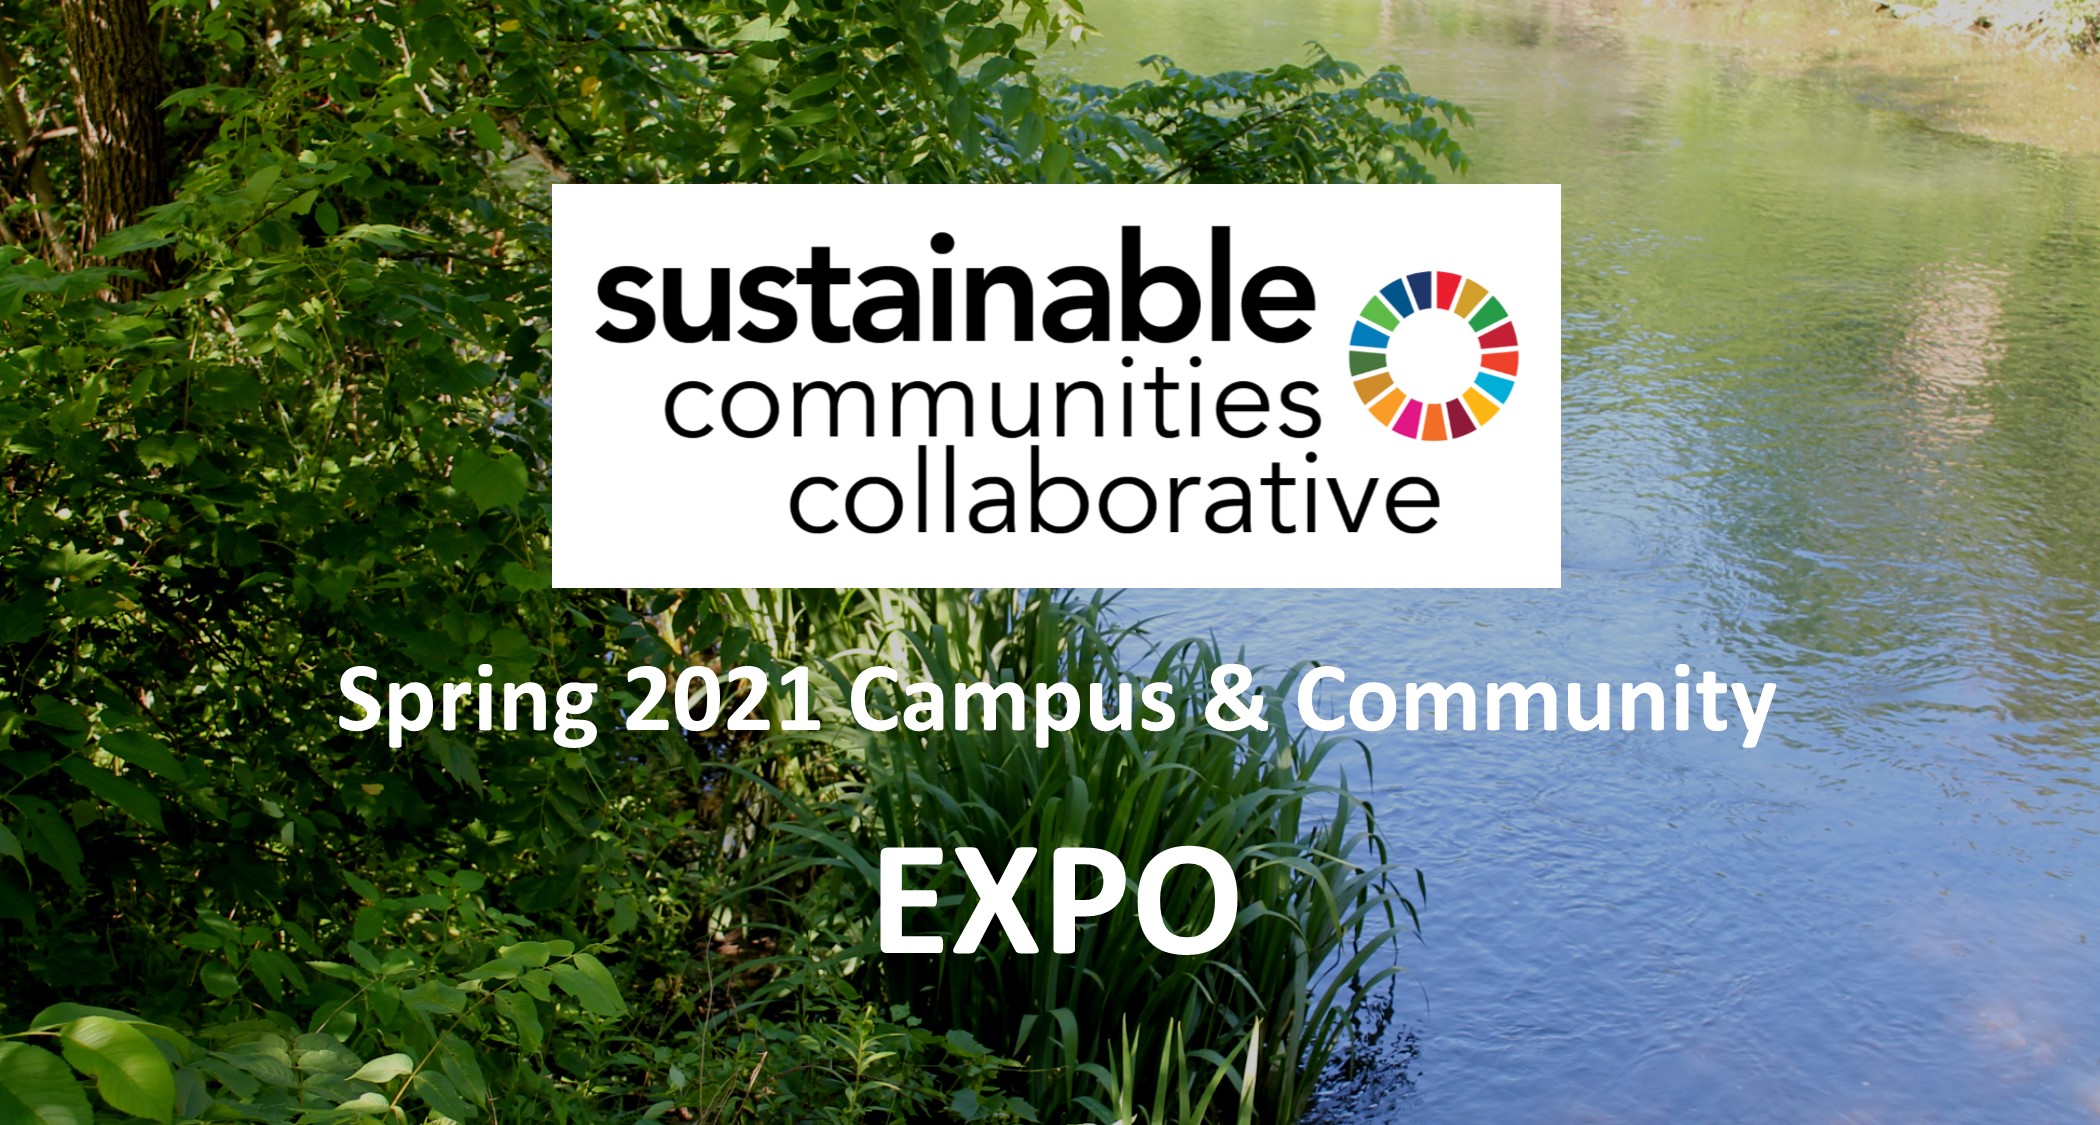 SCC Spring 2021 Expo Penn State Sustainability